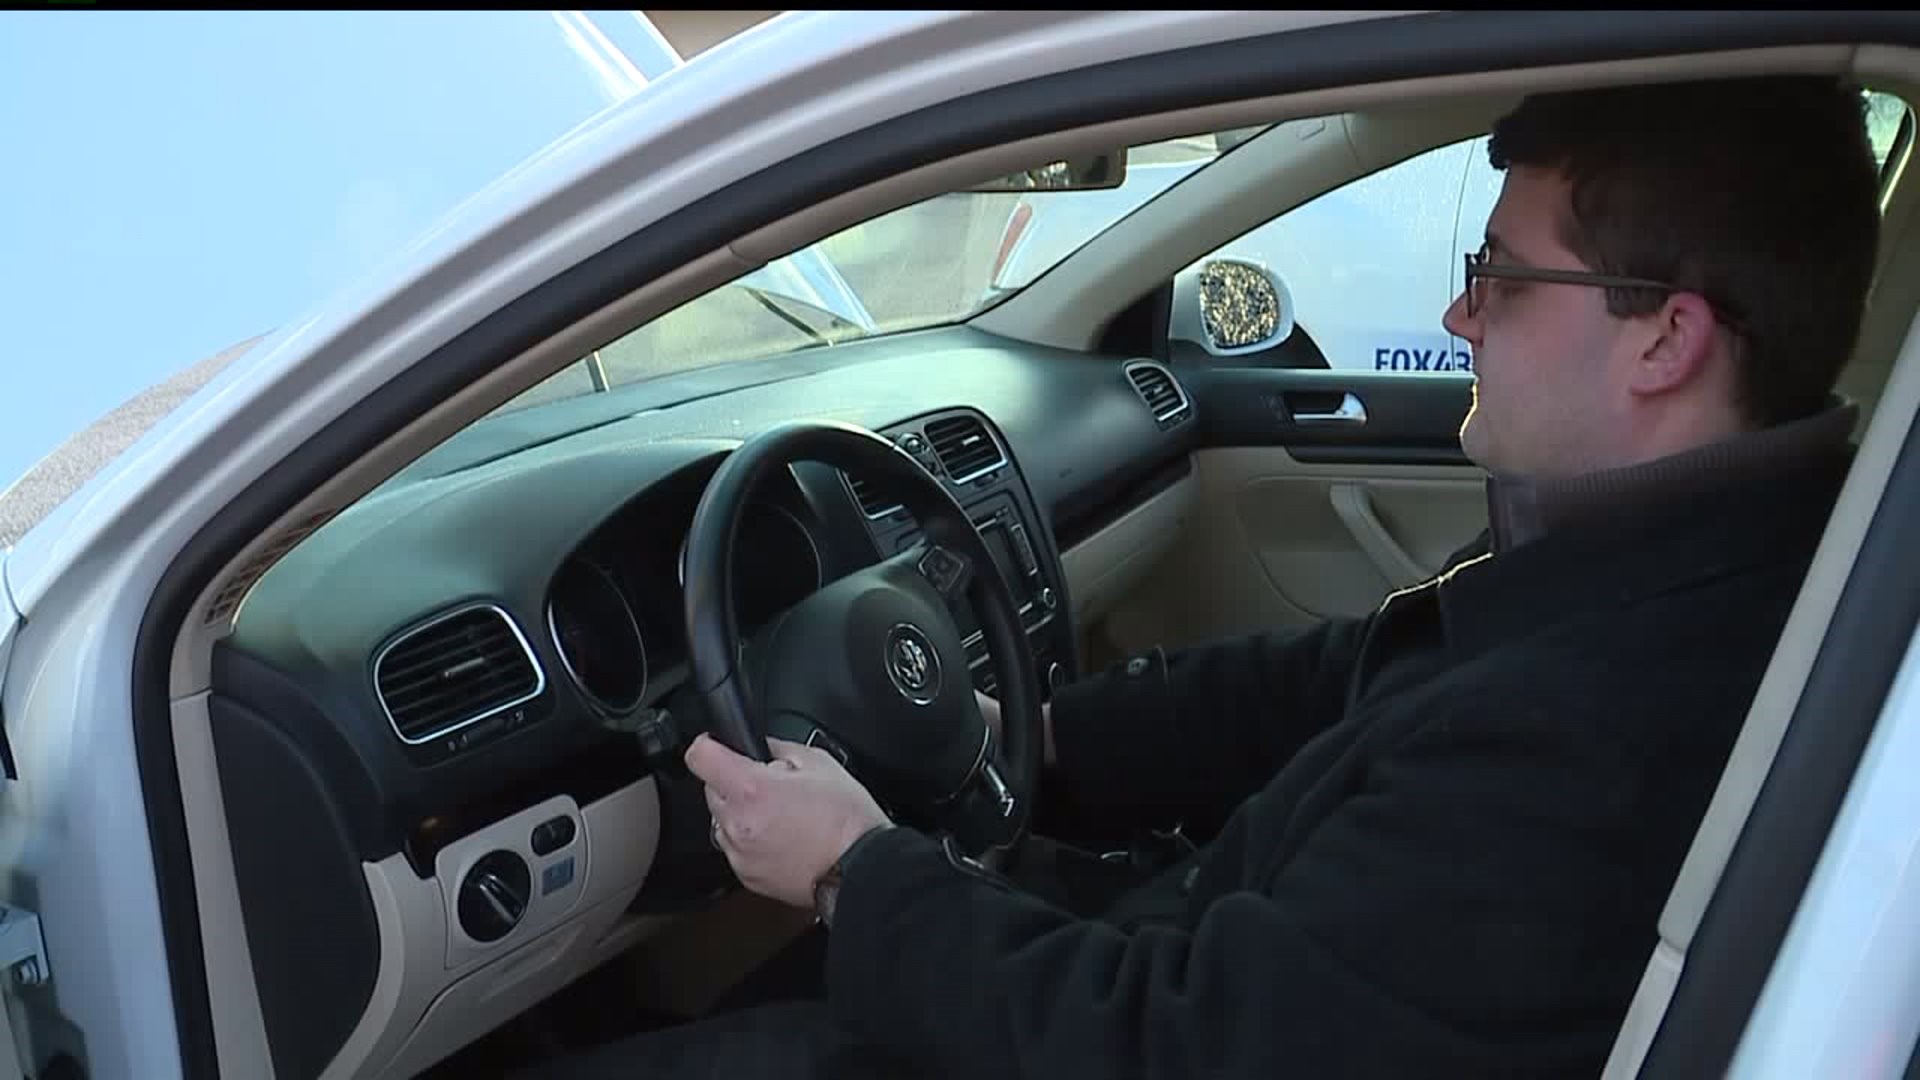 Single digit temperatures could damage your car